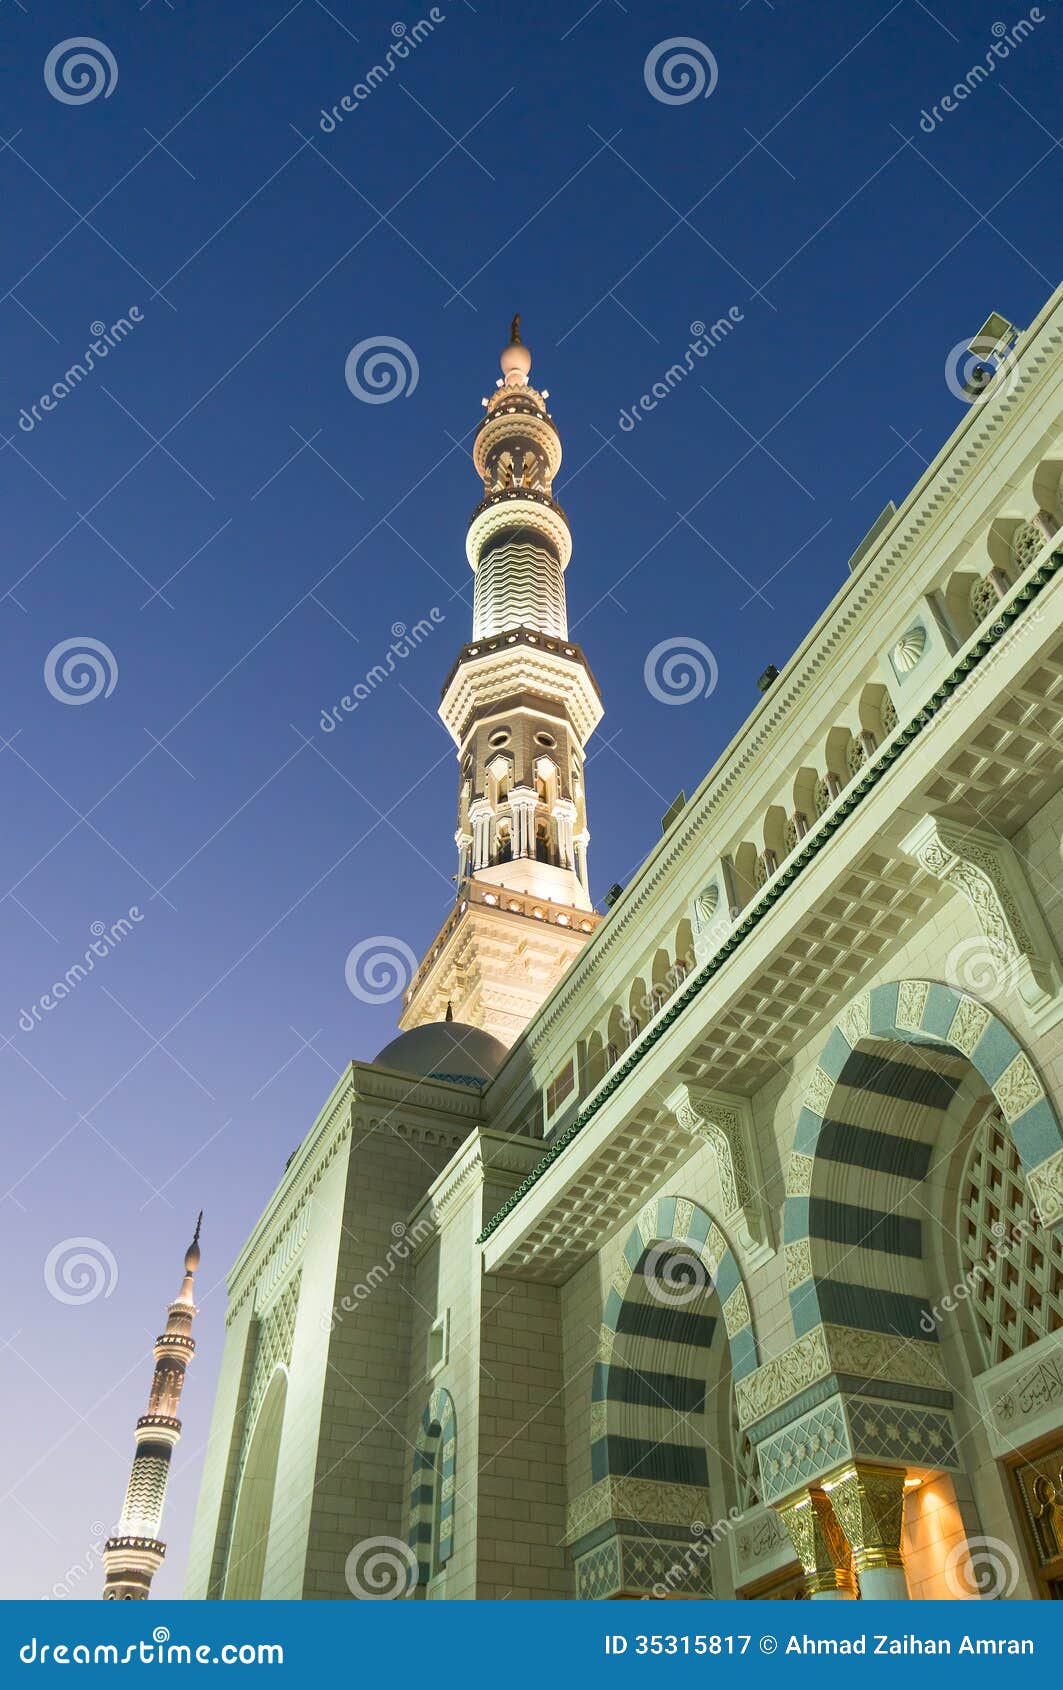 tower of the nabawi mosque